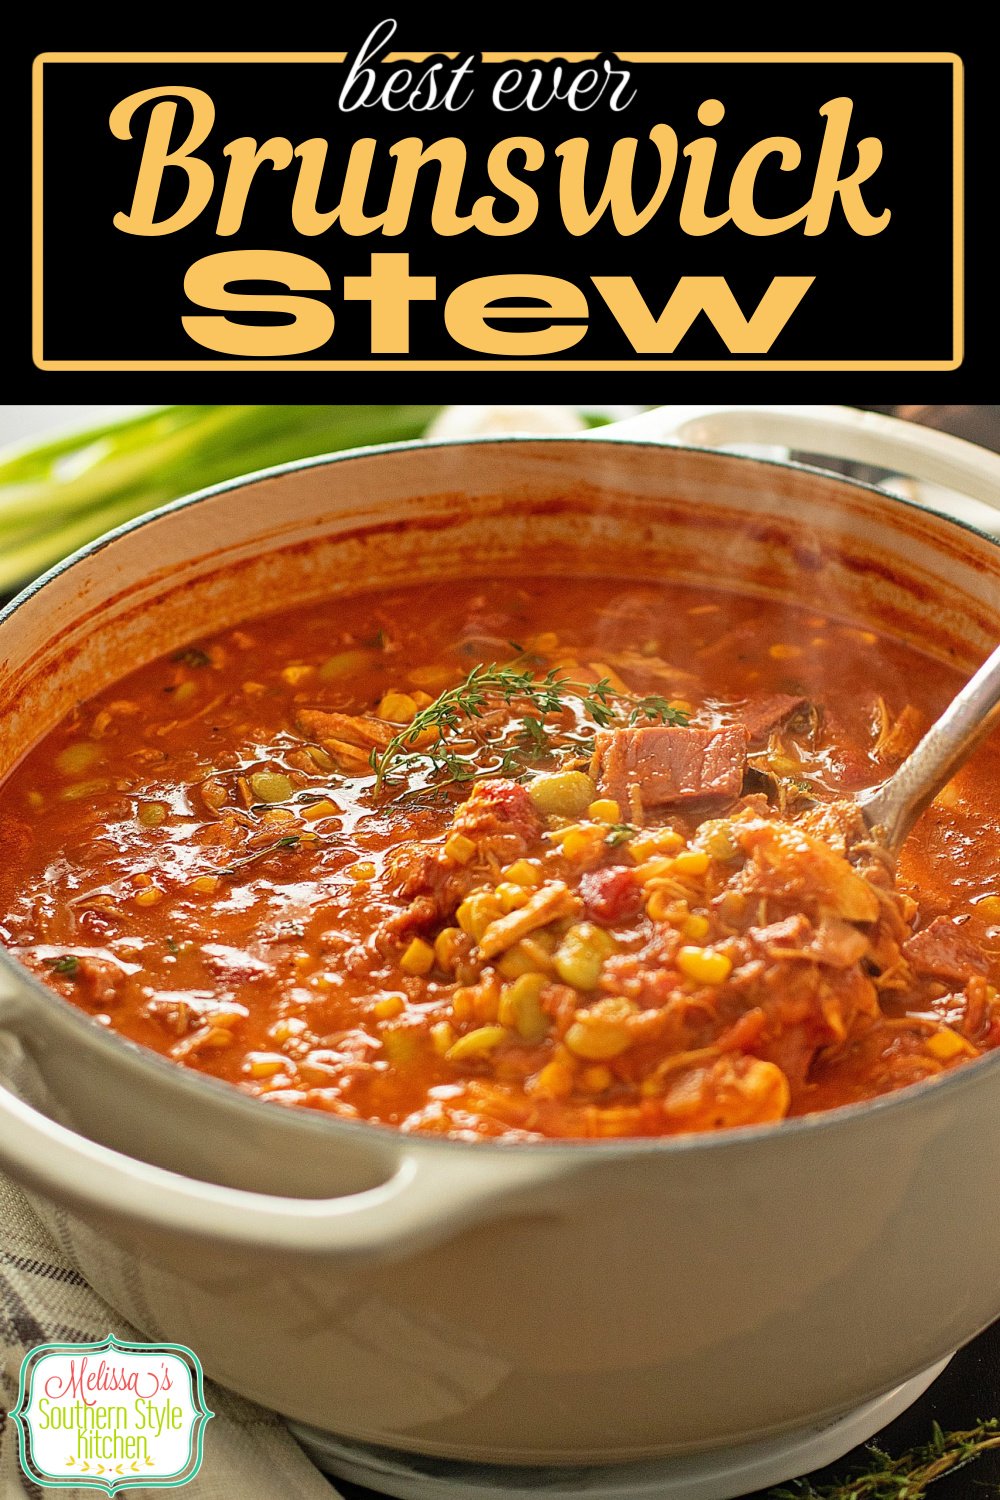 This perfectly seasoned Brunswick Stew features pulled chicken, smoked pork and smoked brisket combined with classic lima beans and corn. #brunswickstew #chickenstew #stewrecipes #easystewrecipes #pulledpork #smokedbrisketrecipes #soup #easybrunswickstew via @melissasssk